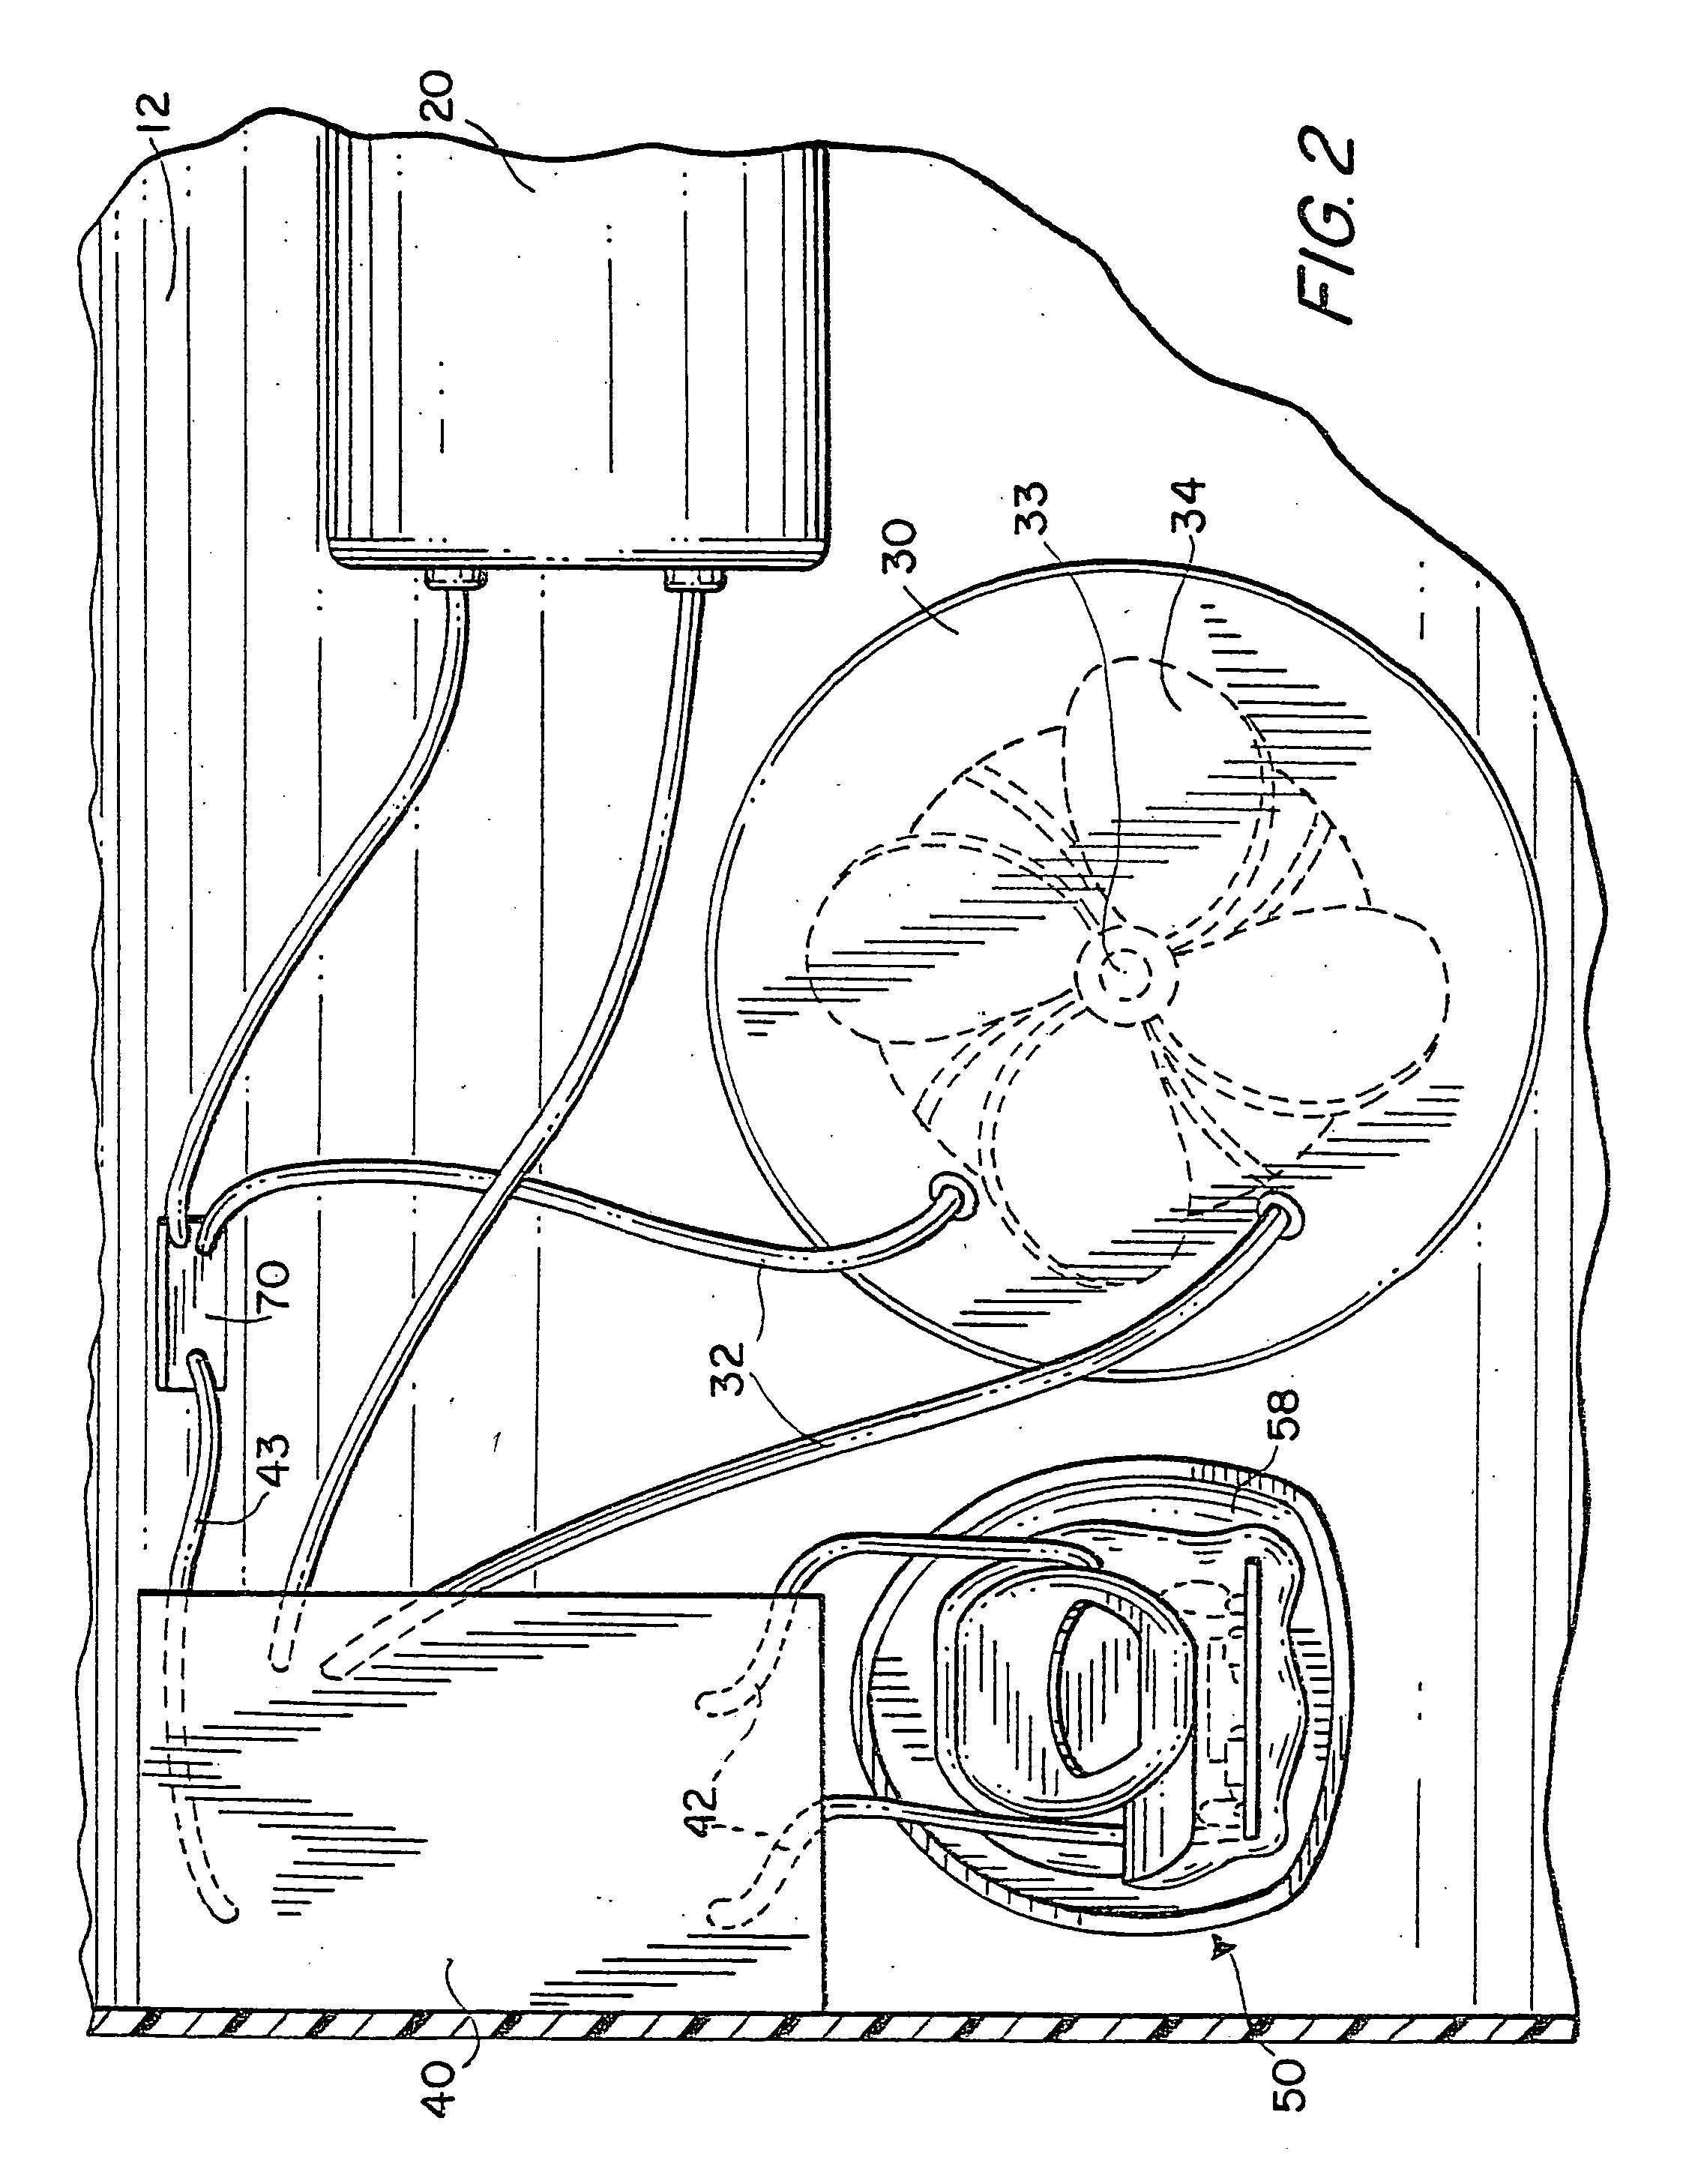 Method of improving the overall operating efficiency of an electric motor-powered assembly